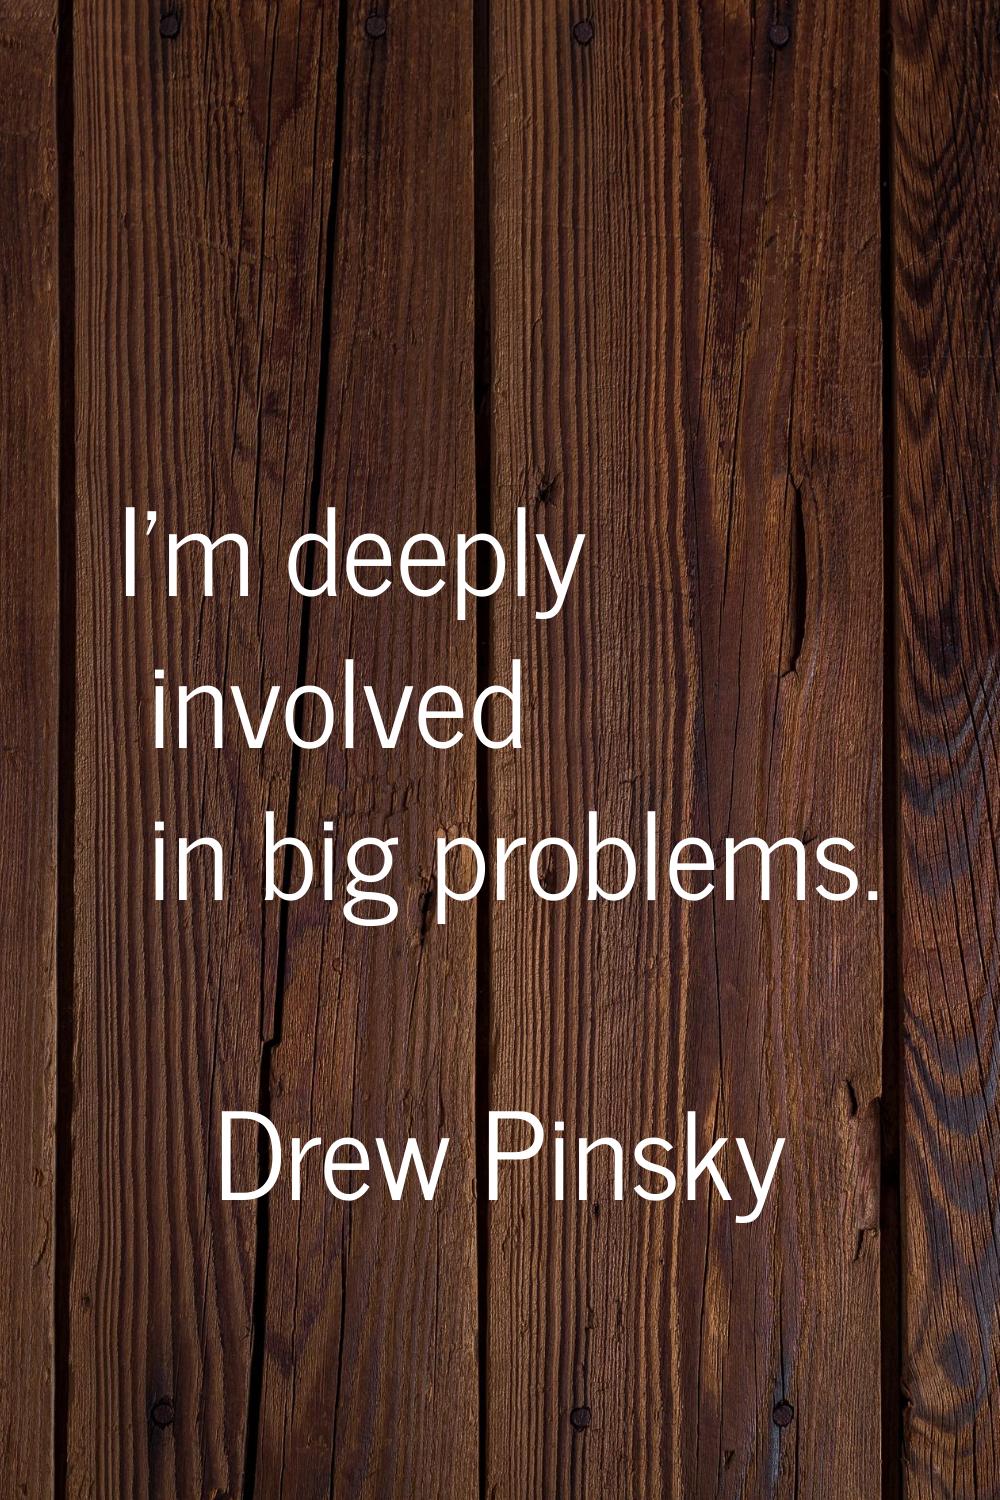 I'm deeply involved in big problems.